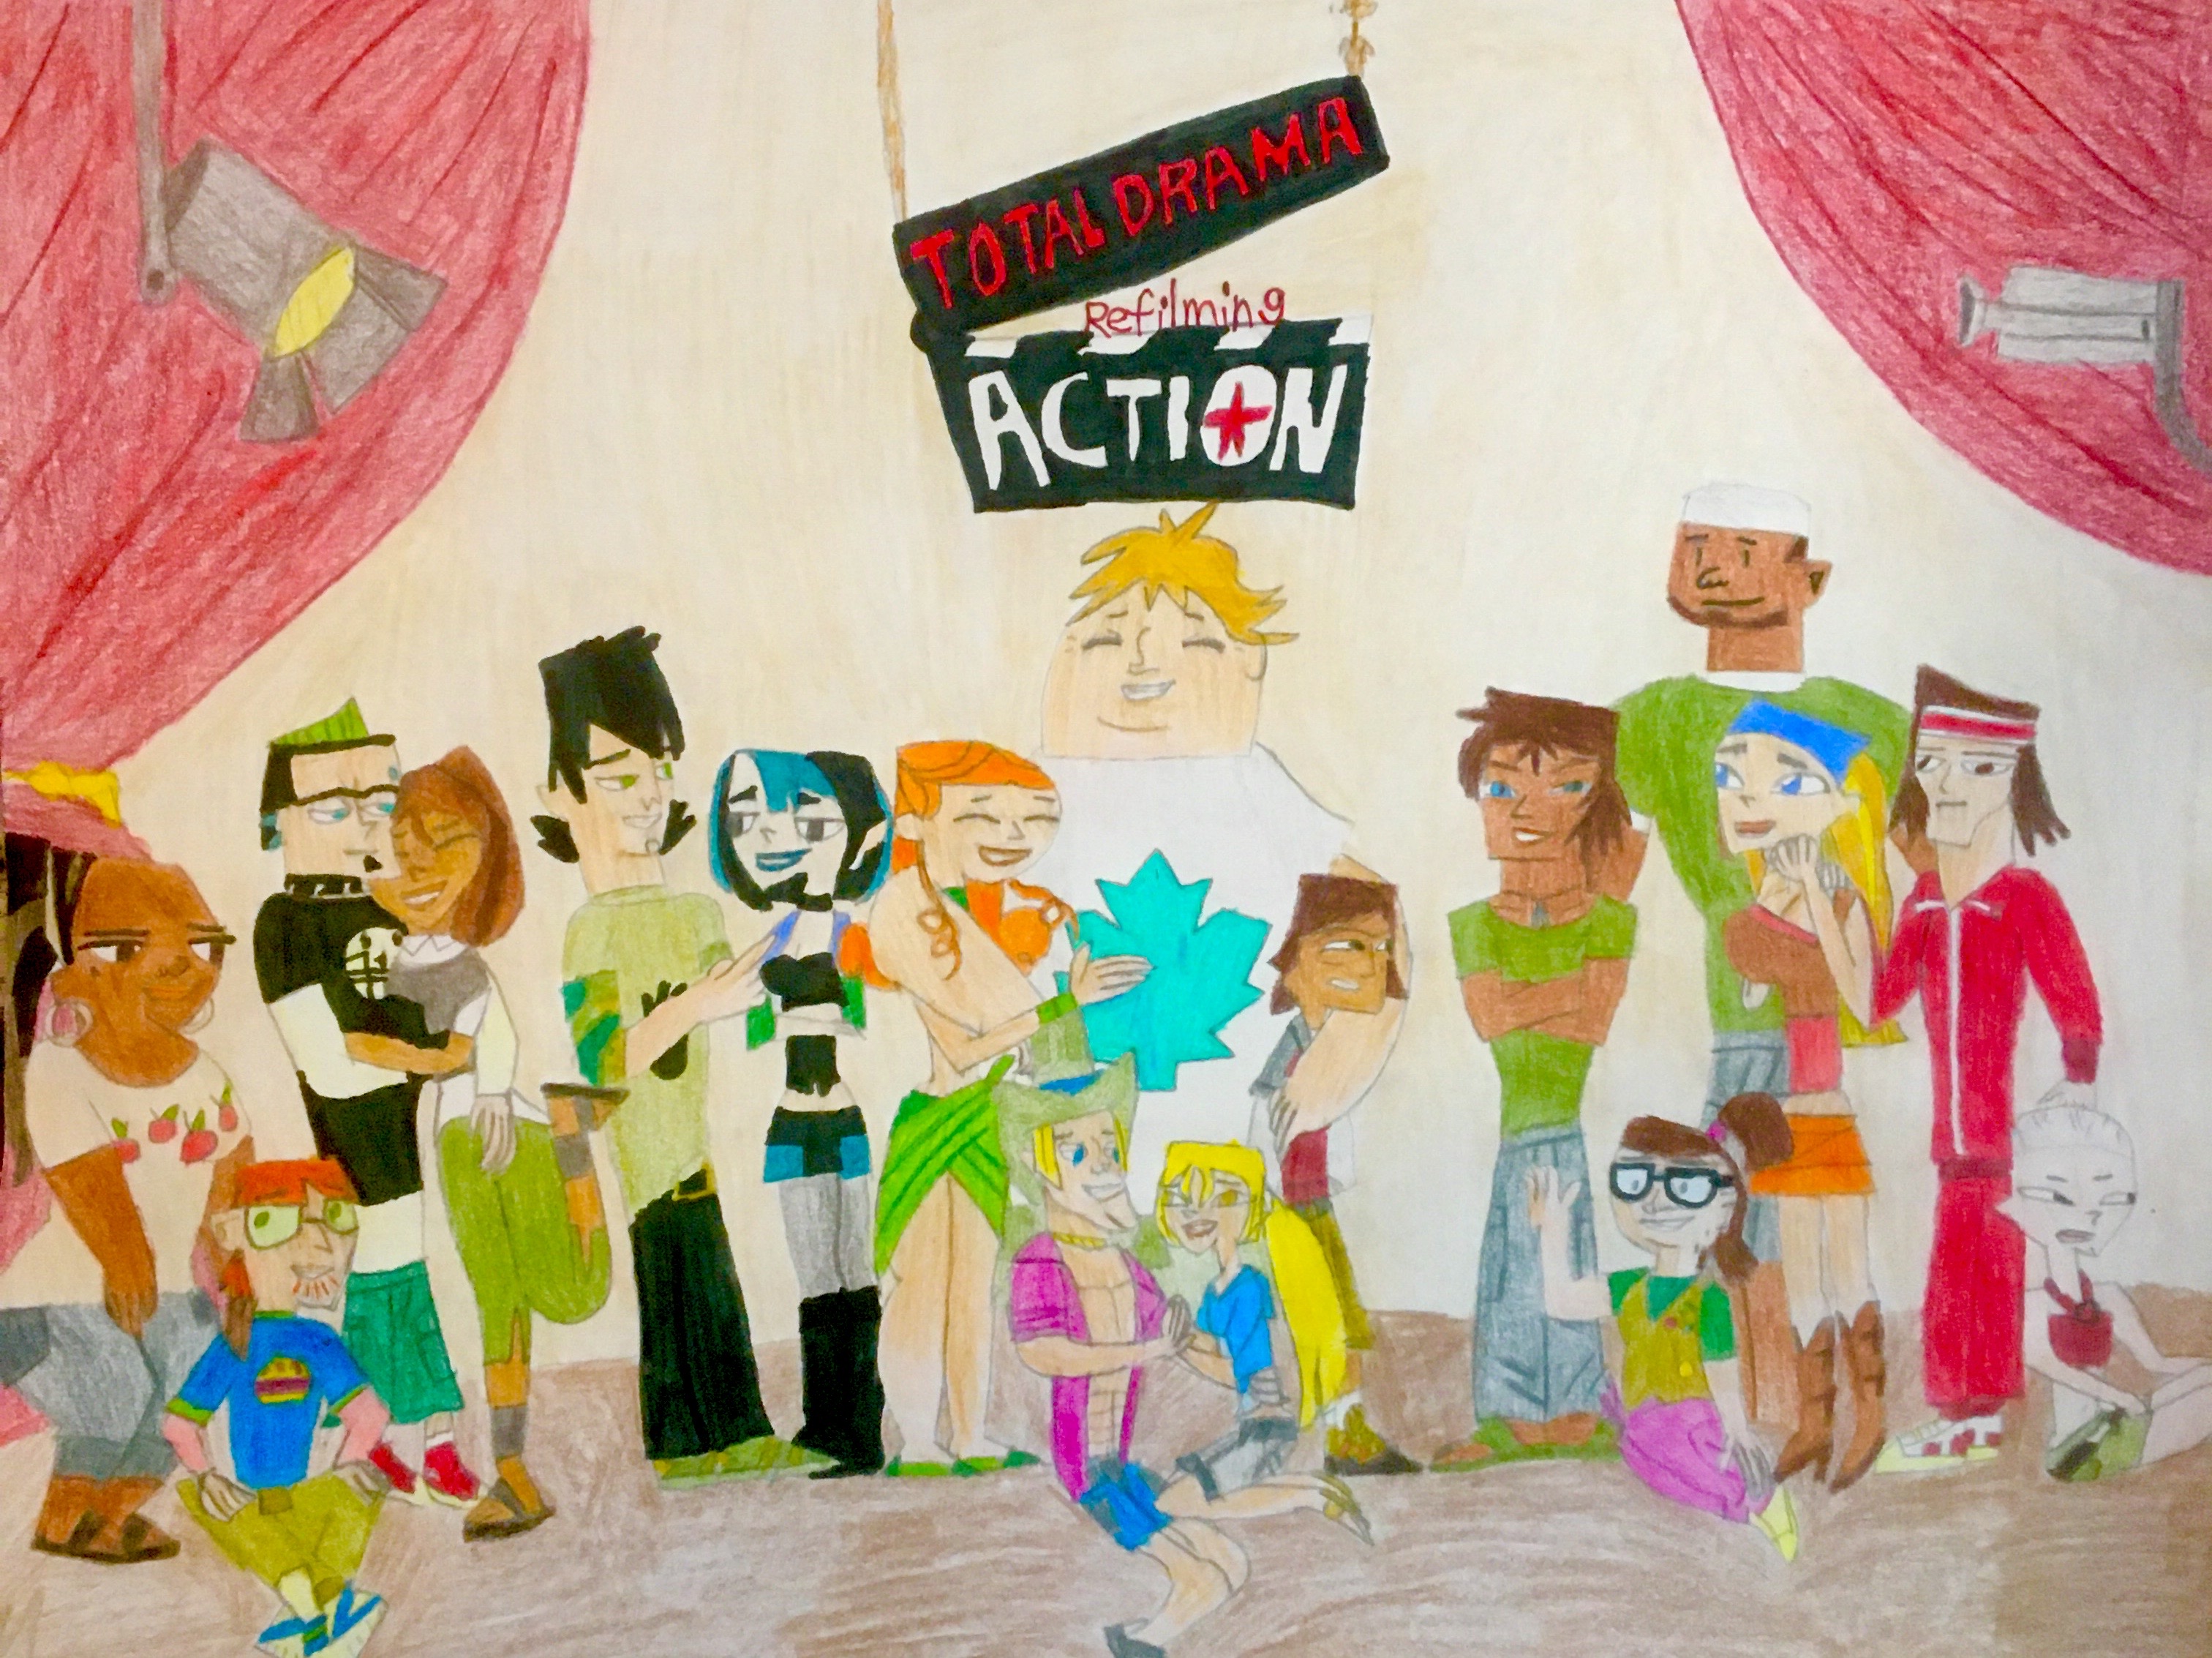 The First Part Of Total Drama: Refilming Action, is coming soon! | Fandom